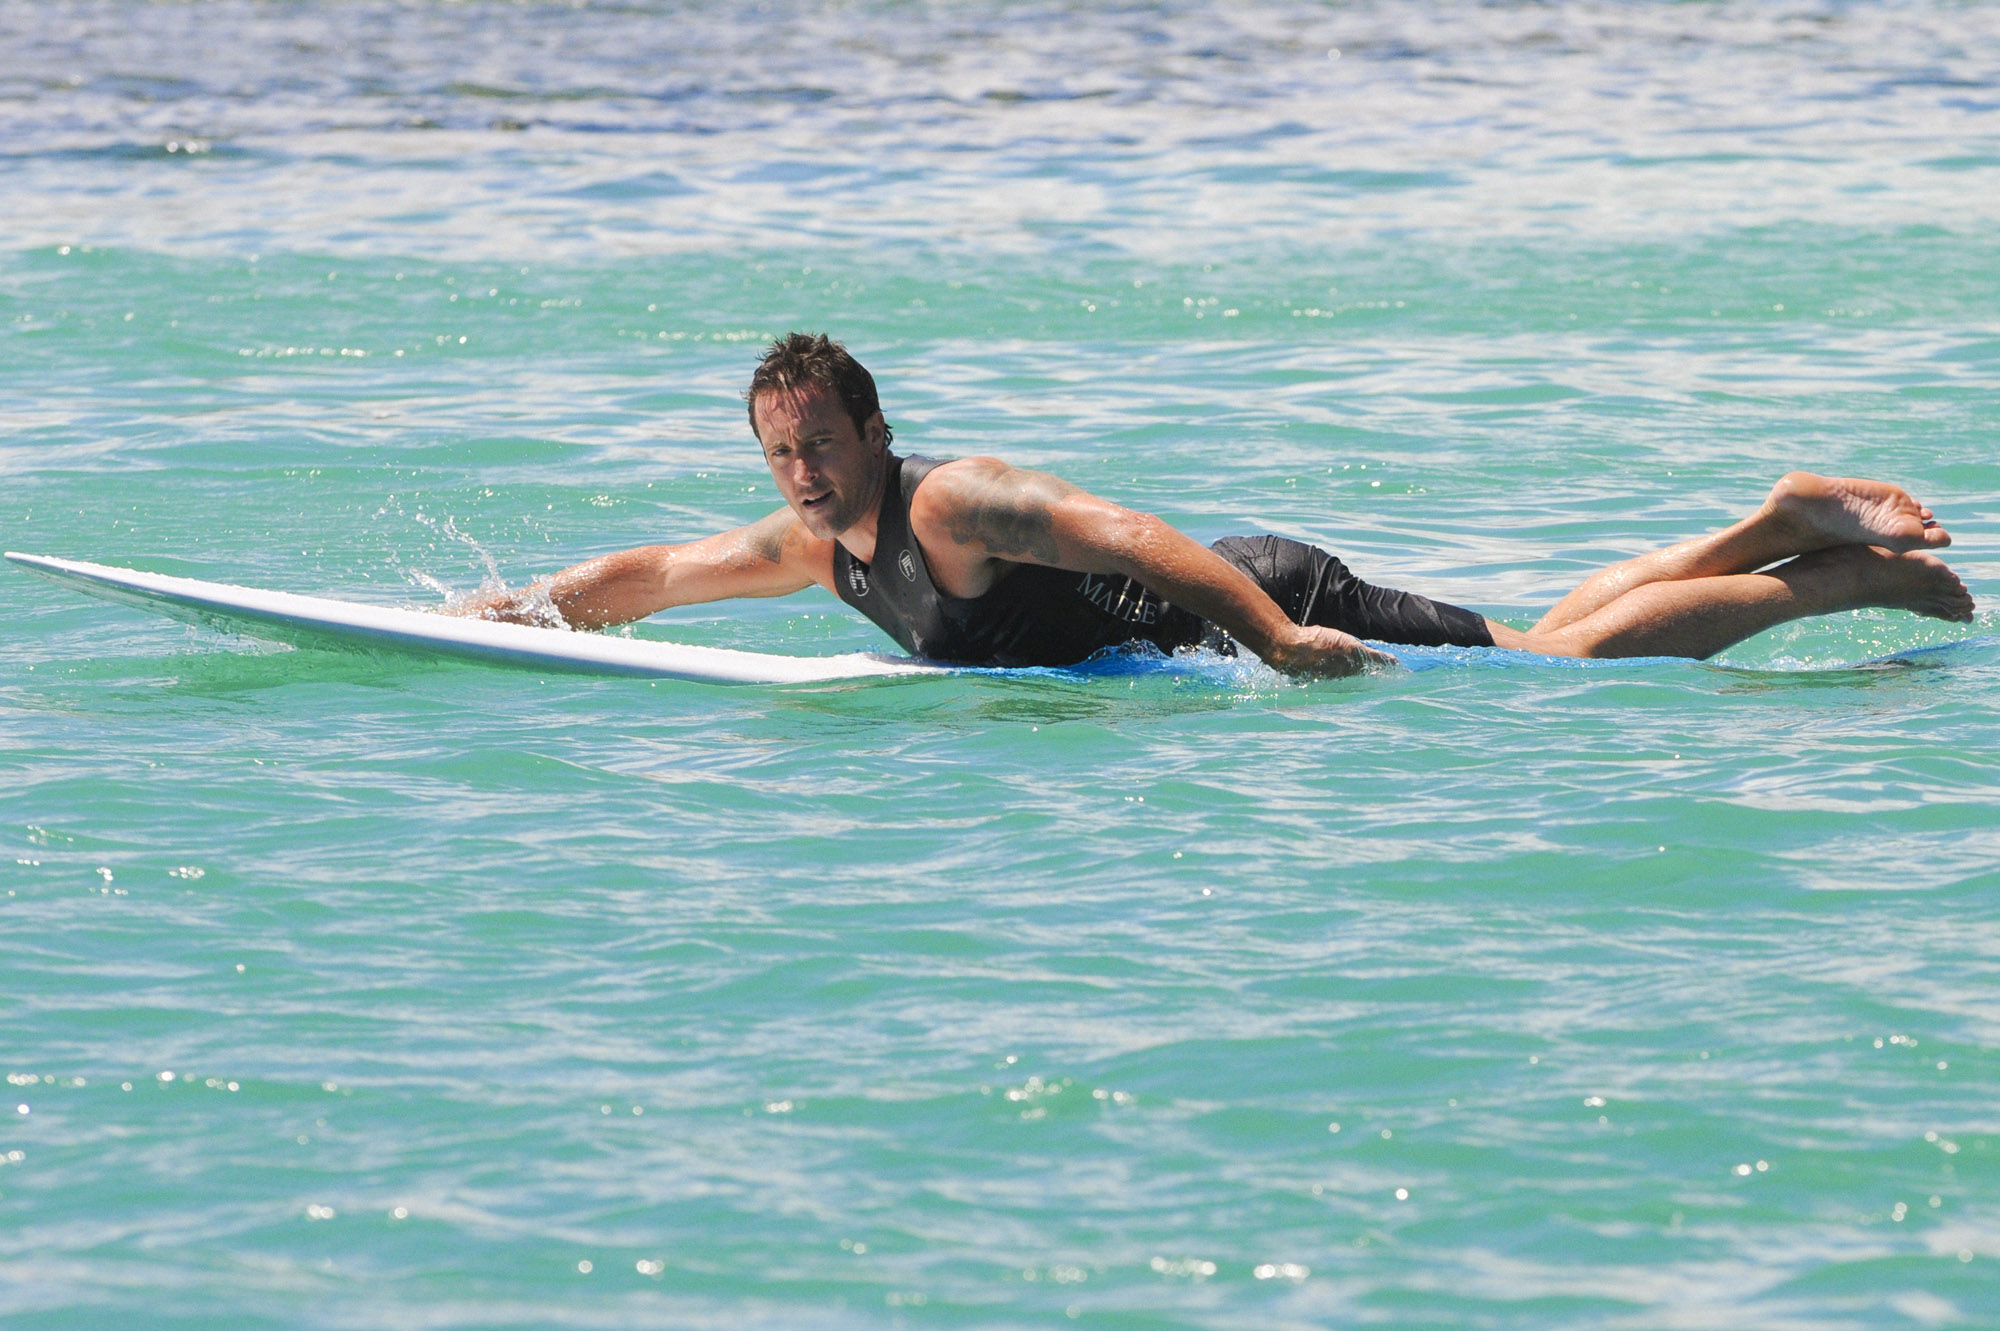 5.) He's gotten into surfing since moving to Hawaii